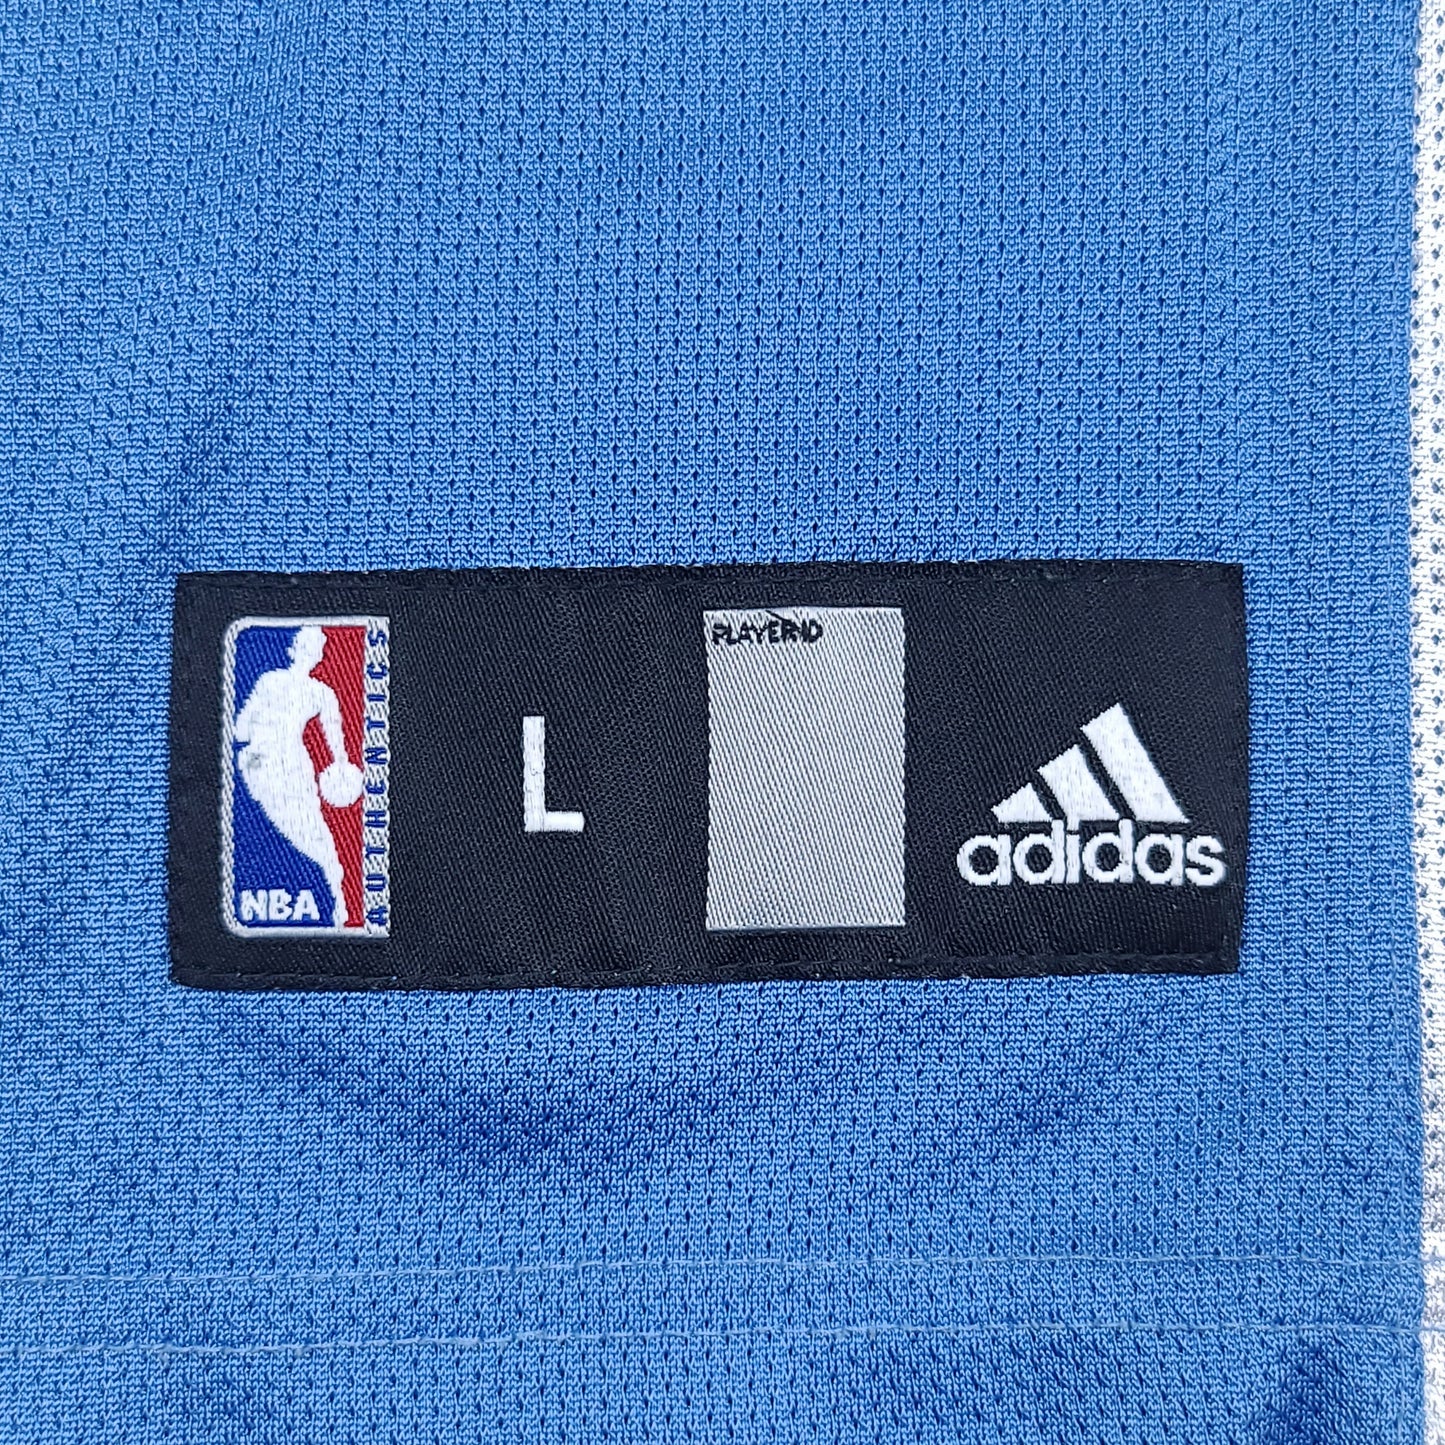 Allen Iverson Denver Nuggets Blue adidas Youth Jersey